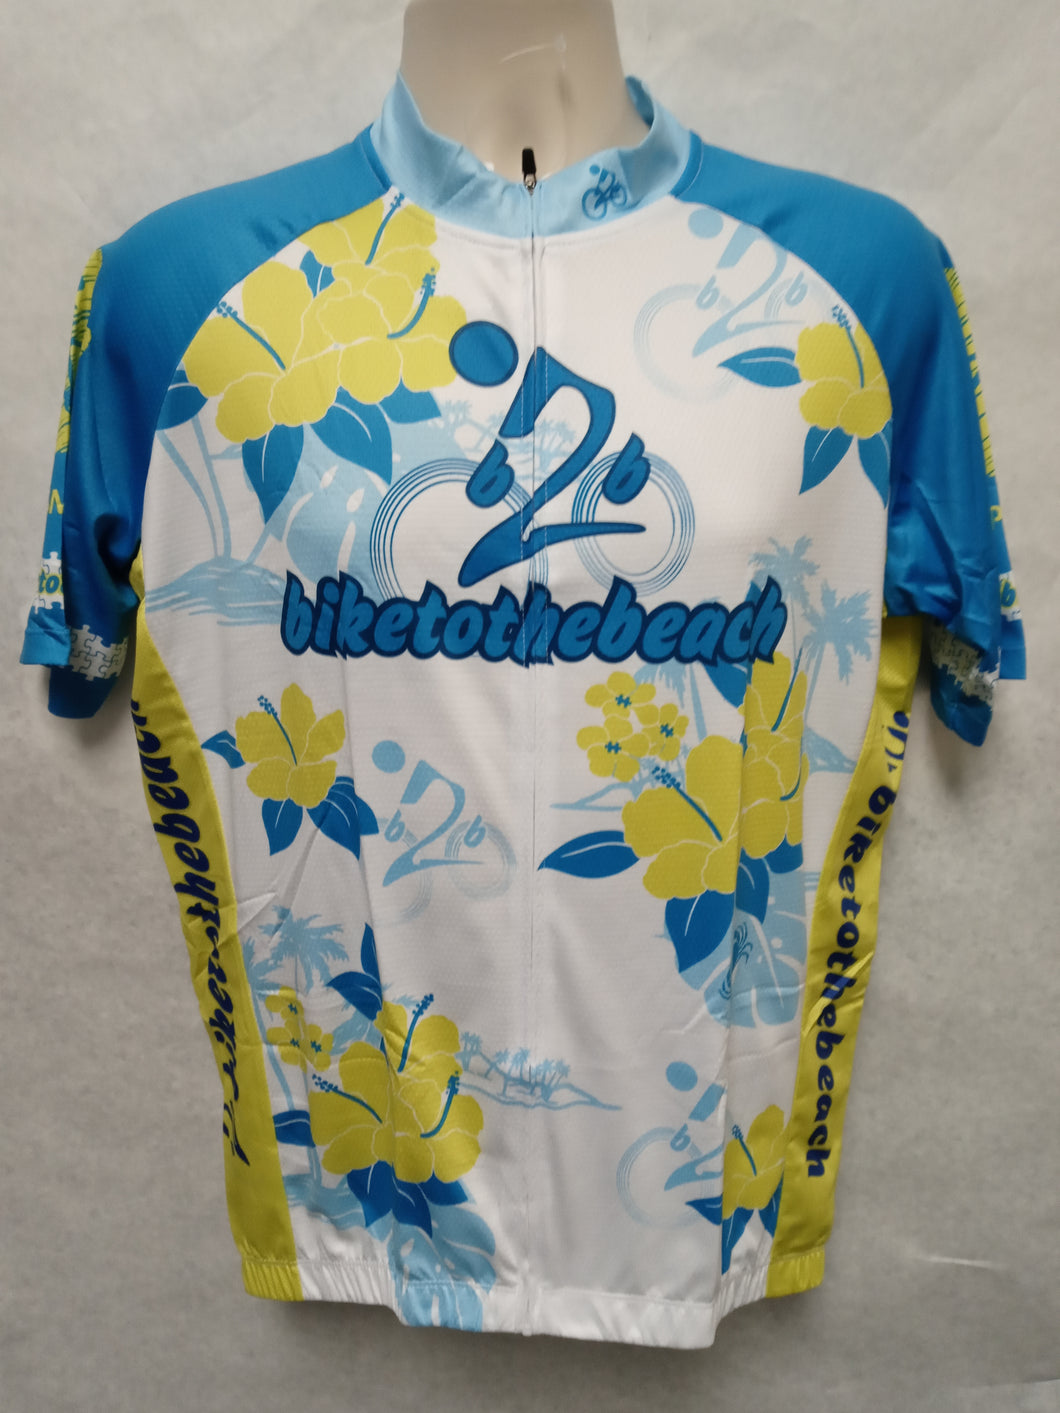 Bike to the Beach Classic Floral White / Yellow / Blue Bike Jersey